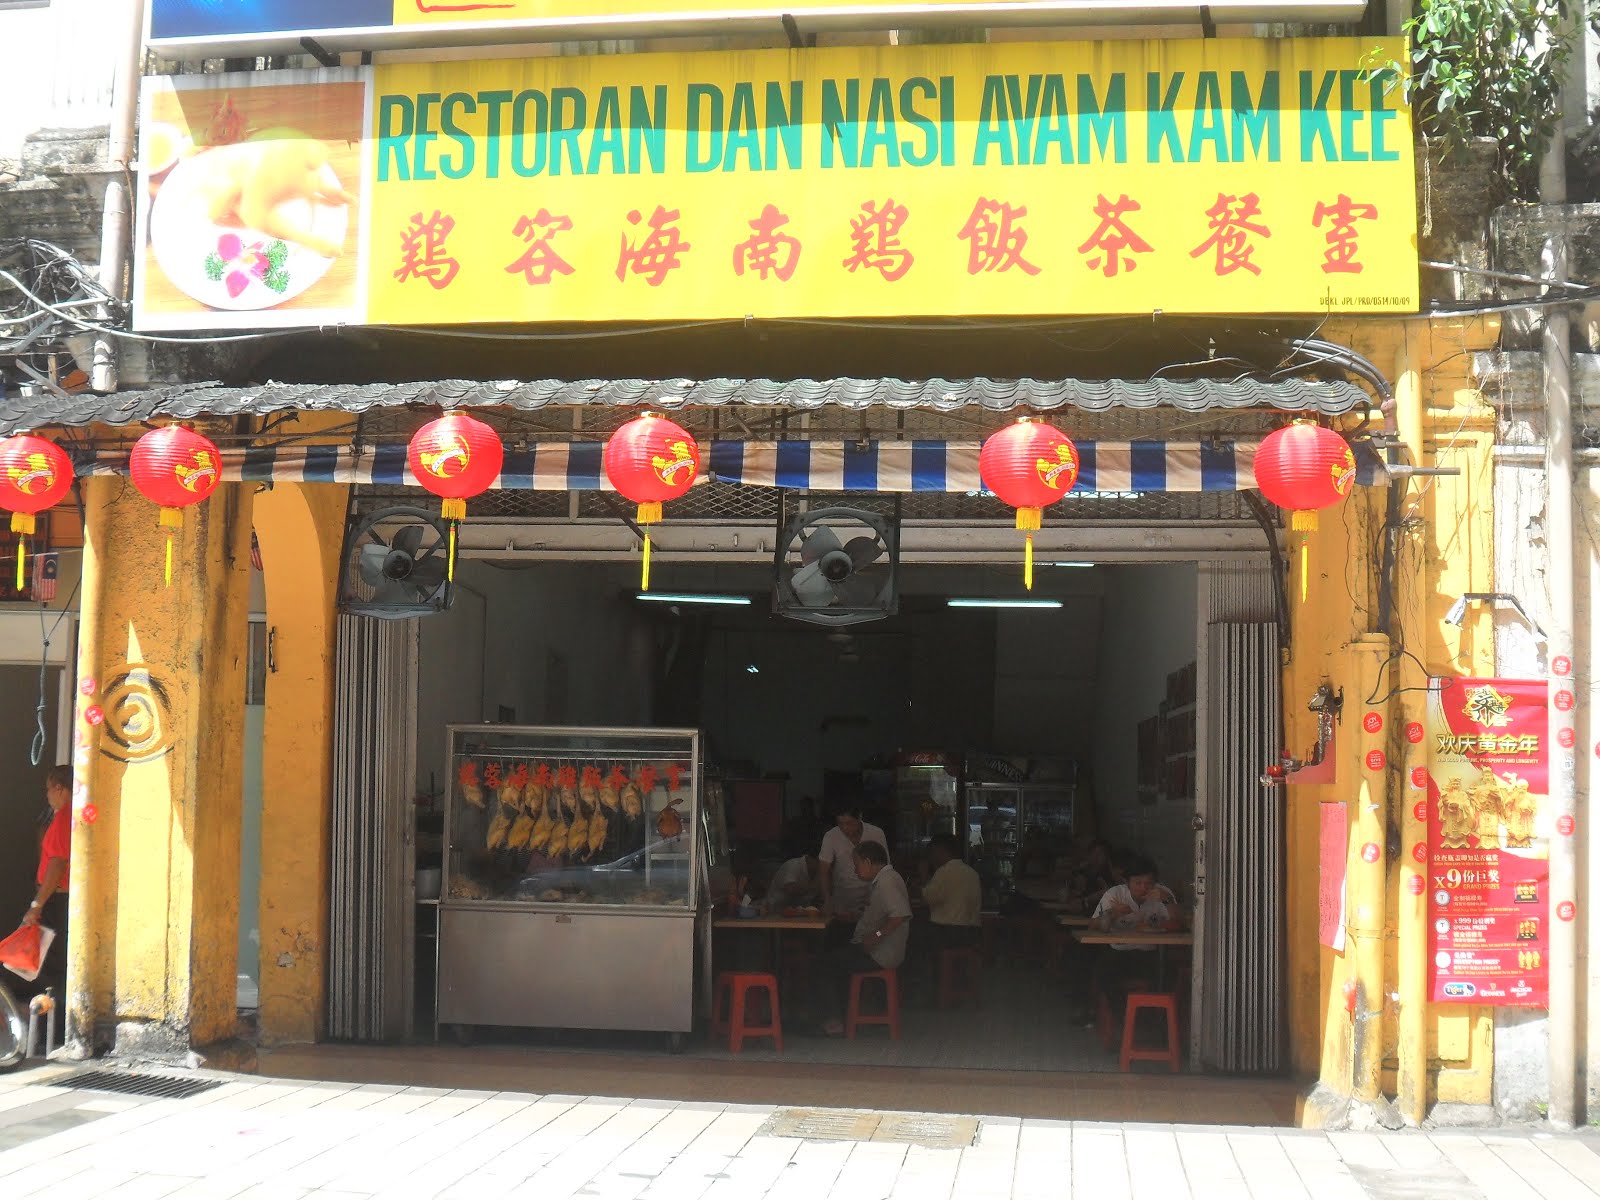 Kee chicken rice kam Tasting a